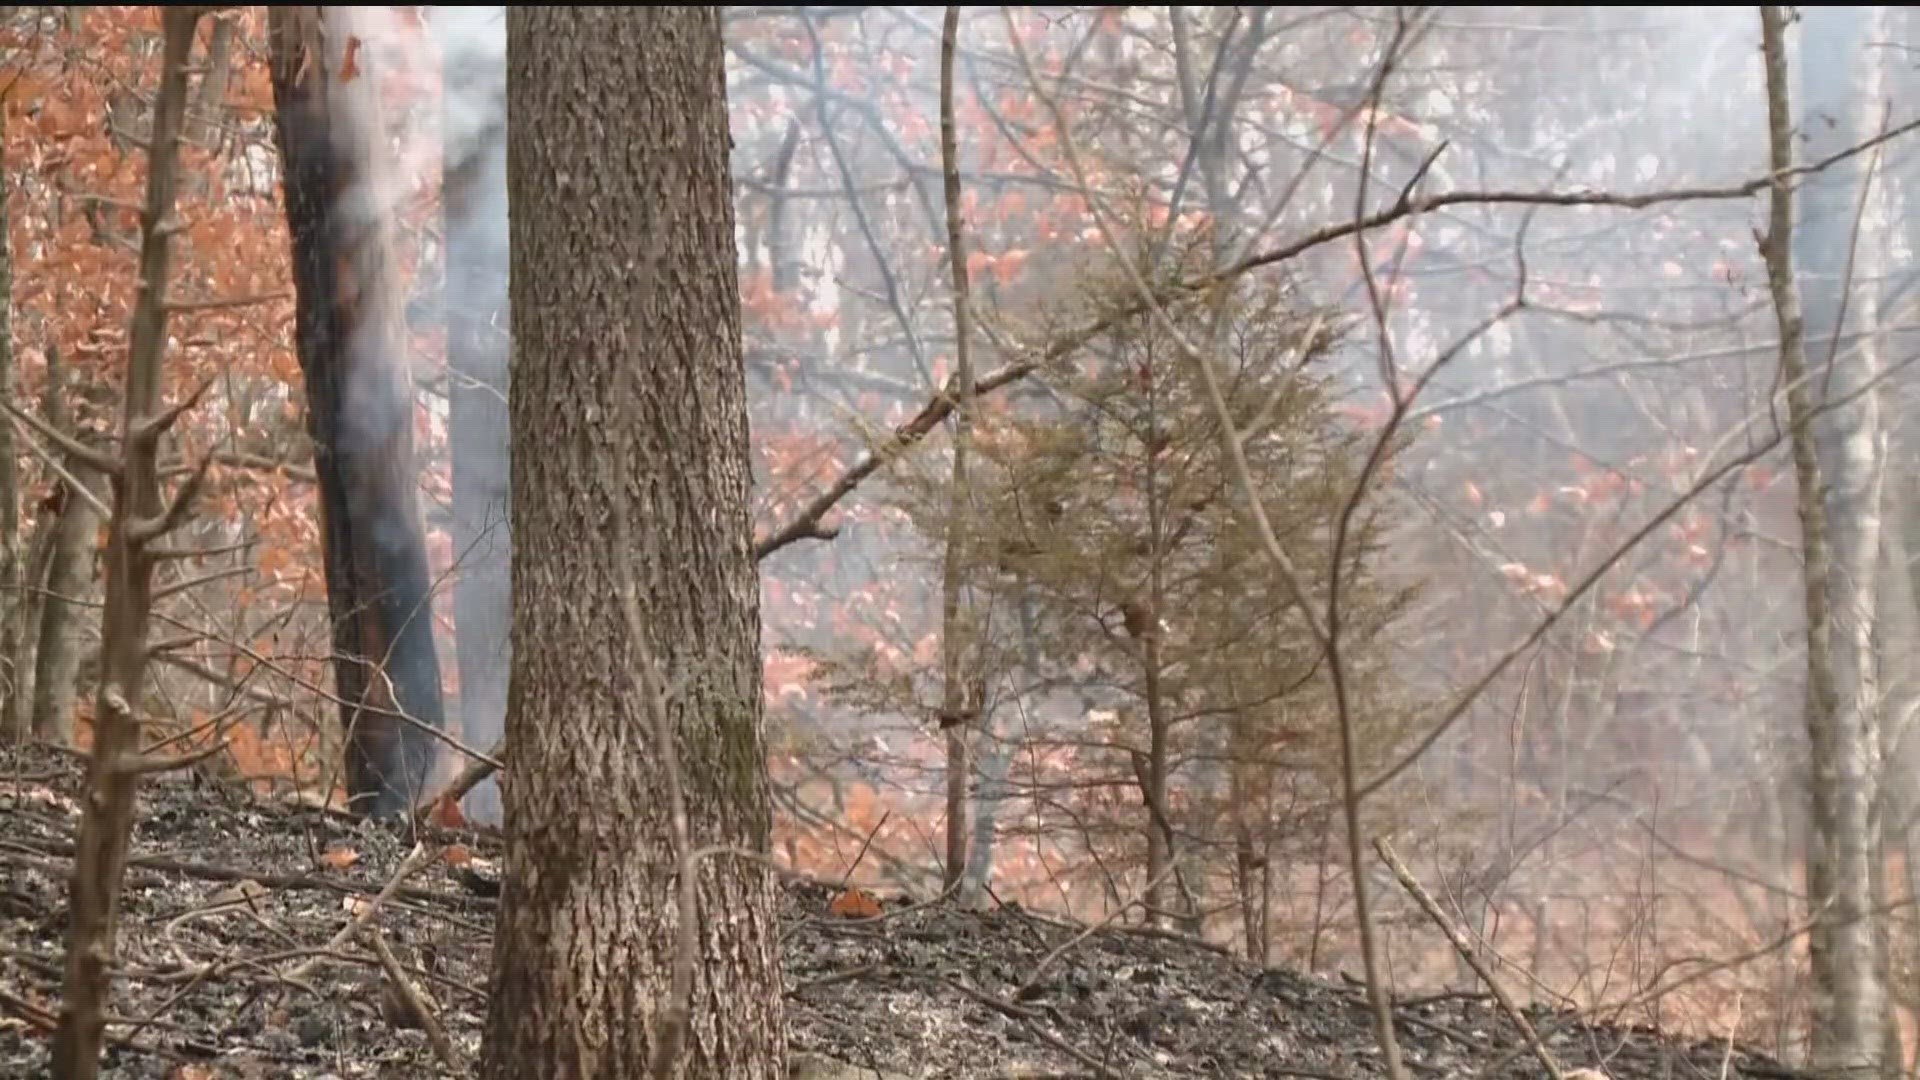 Firefighters have been fighting fires in north Hall County throughout the day.